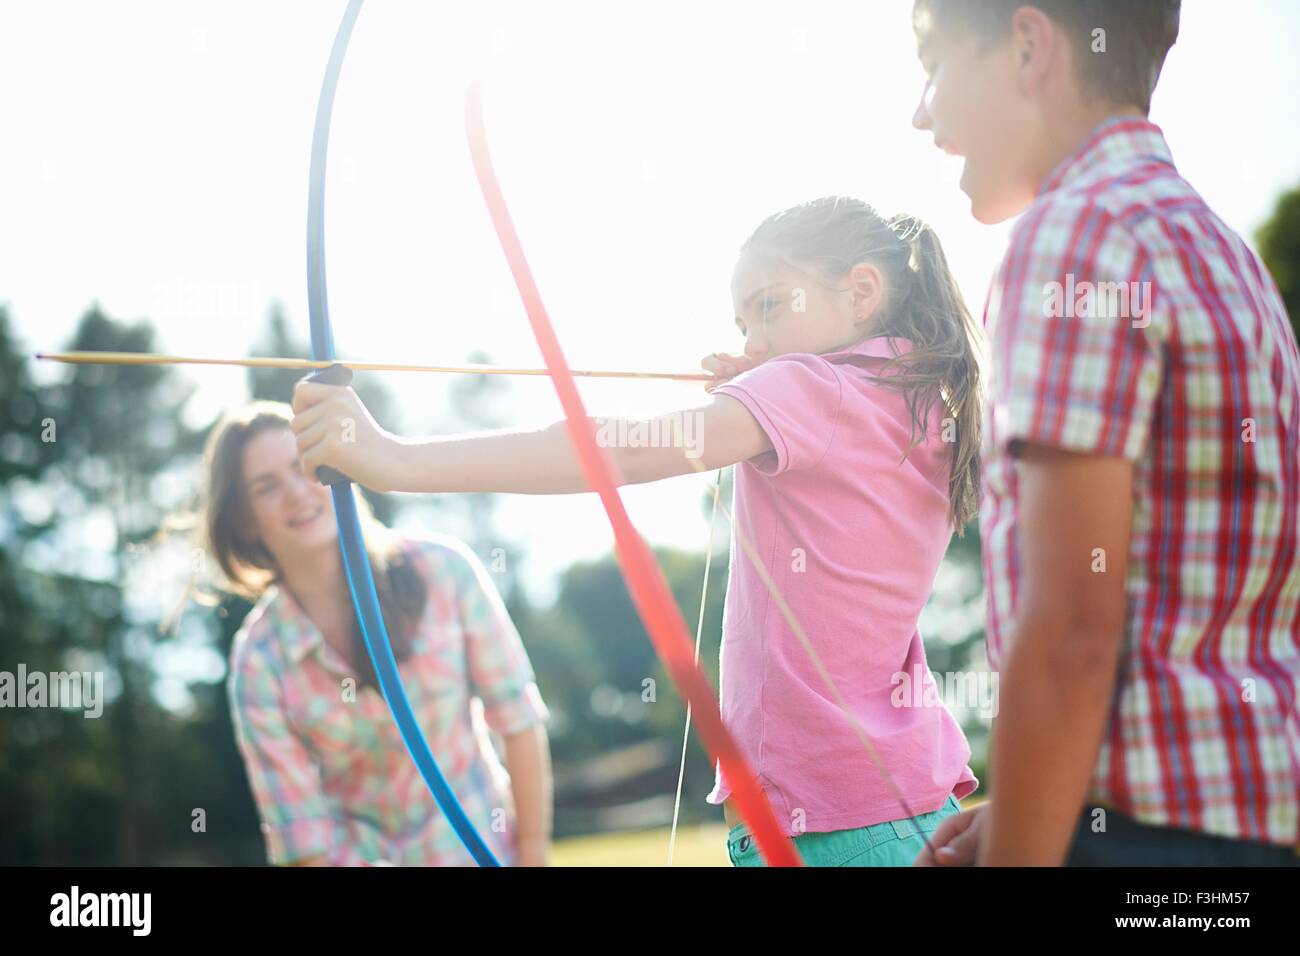 Girl learning archery from teenage sister and brother Stock Photo